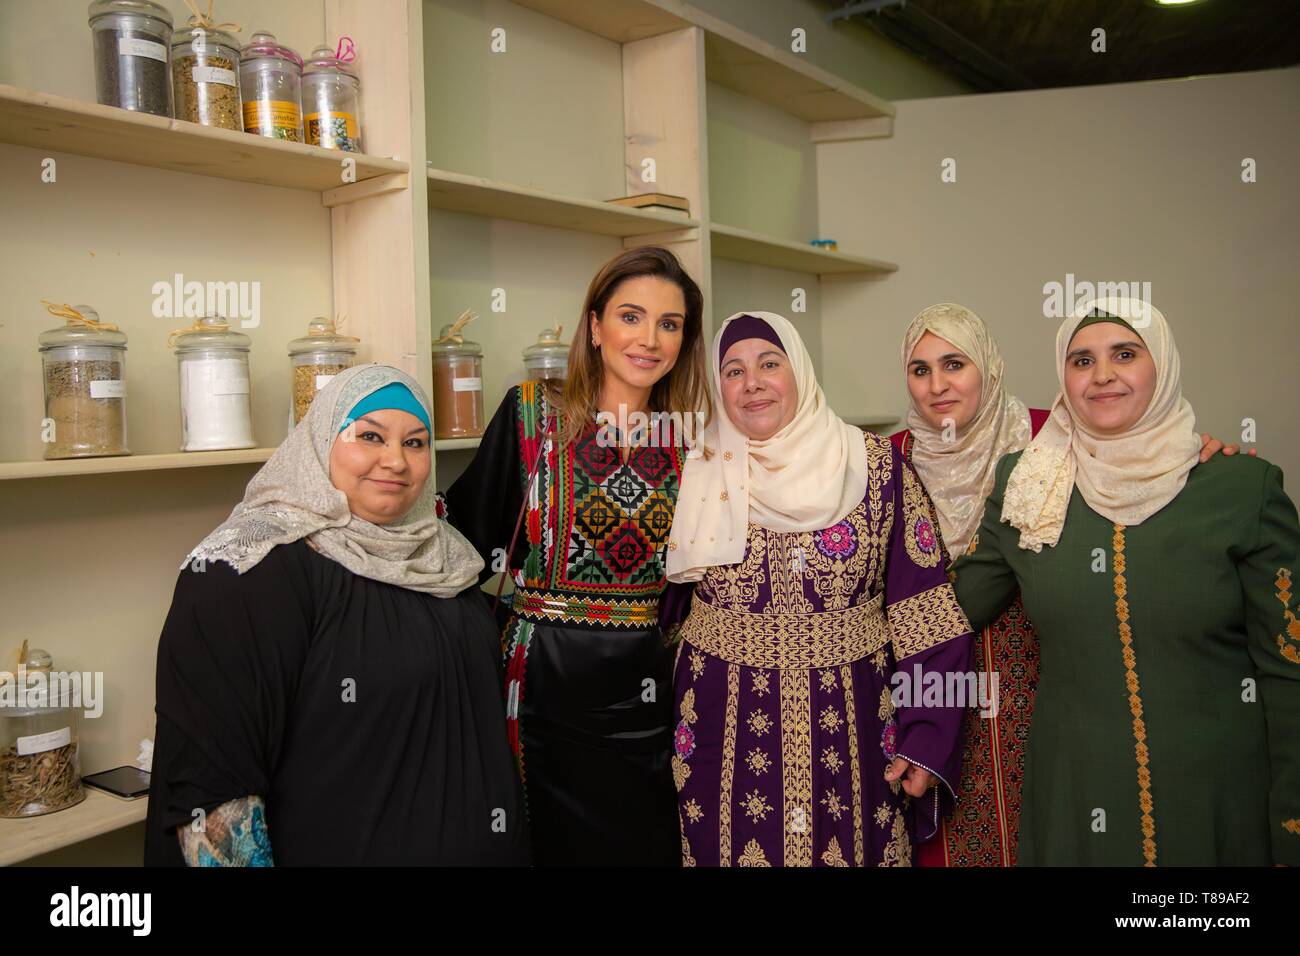 Ajloun, Jordan. 07th May, 2019. Queen Rania joins a group of women for Iftar in Ajloun, on May 07, 2019, she hosted an Iftar banquet at the Royal Academy for Nature Conservation Restaurant for a group of women active in civil society, education, and volunteer work Credit: Royal Hashemite Court/Albert Ph van der Werf/Netherlands OUT/Point De Vue OUT |/dpa/Alamy Live News Stock Photo